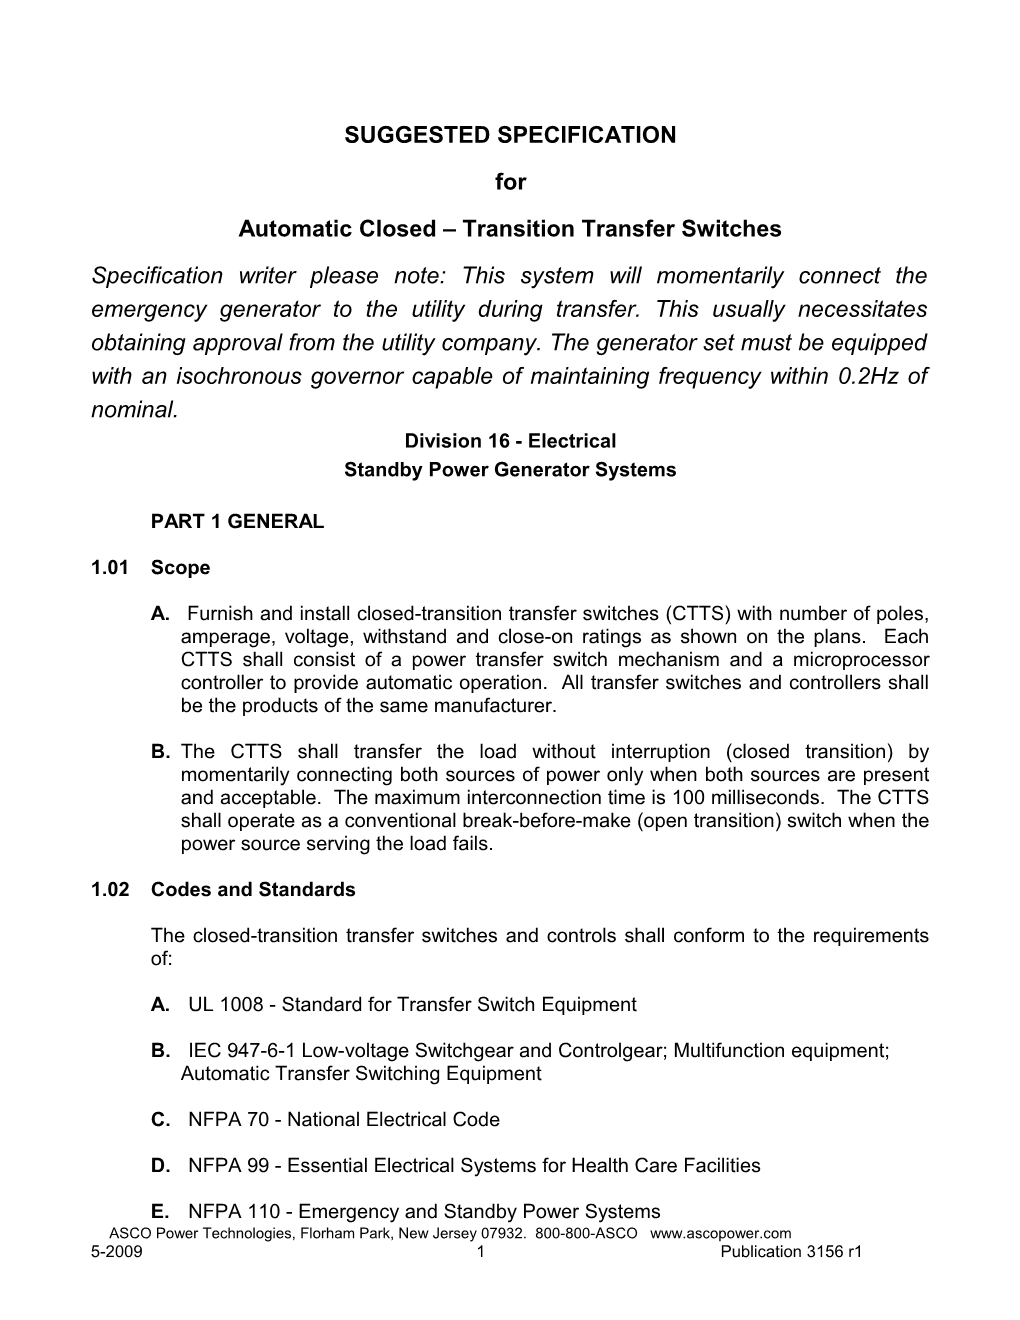 ASCO 4000 SUGGESTED SPECIFICATION for Automatic Closed - Transition Transfer Switches (Pub 3156)